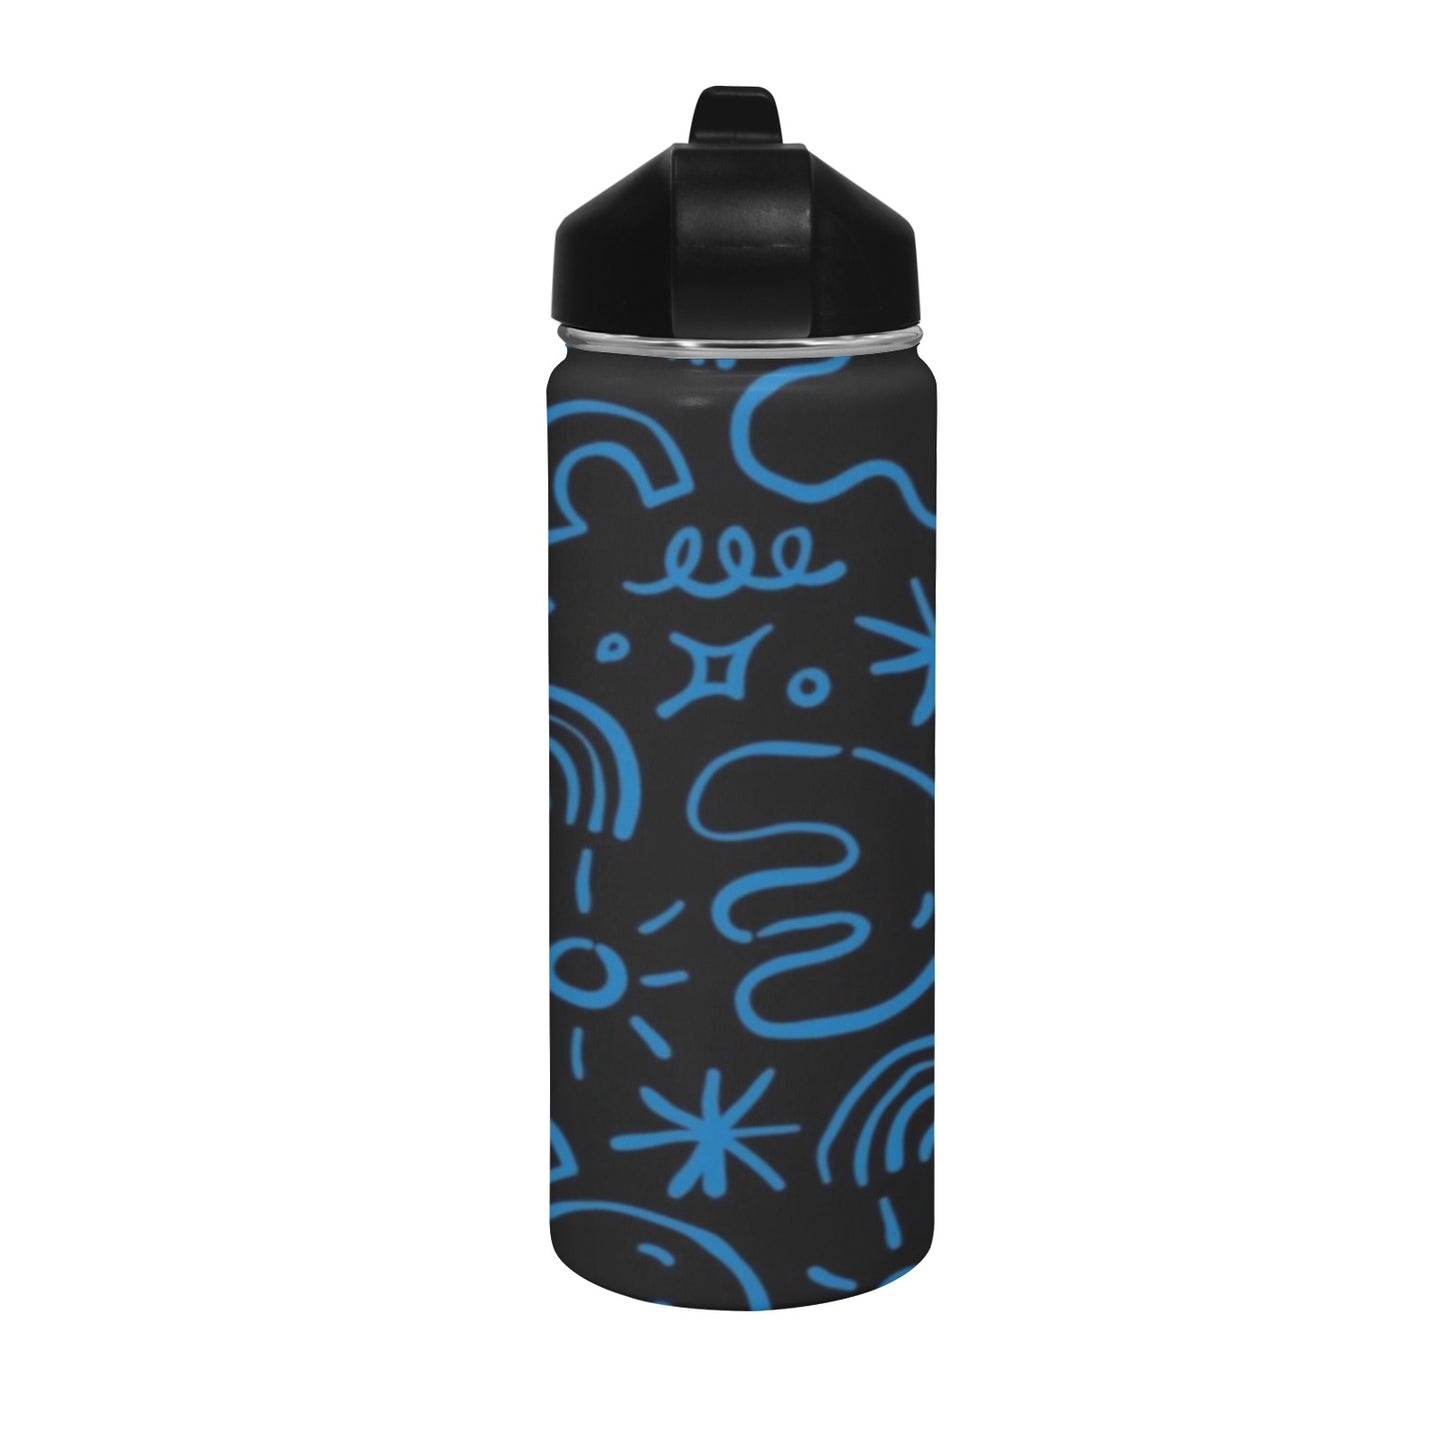 Blue Squiggle - Insulated Water Bottle with Straw Lid (18 oz) Insulated Water Bottle with Straw Lid